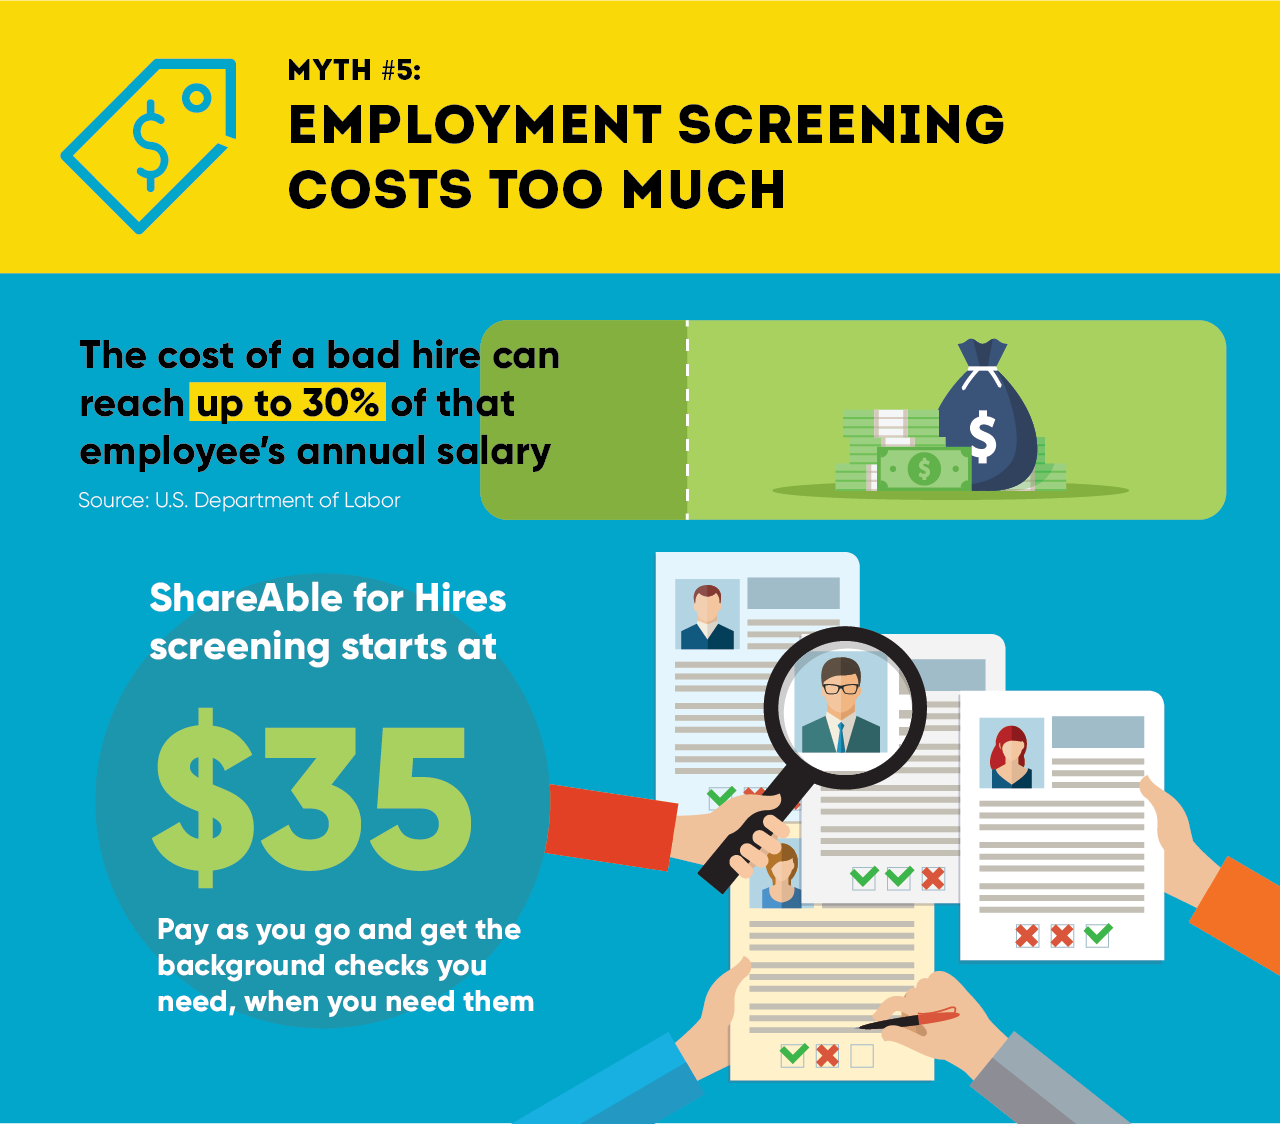 Infographic highlights employment myth that reads “employment screening costs too much”